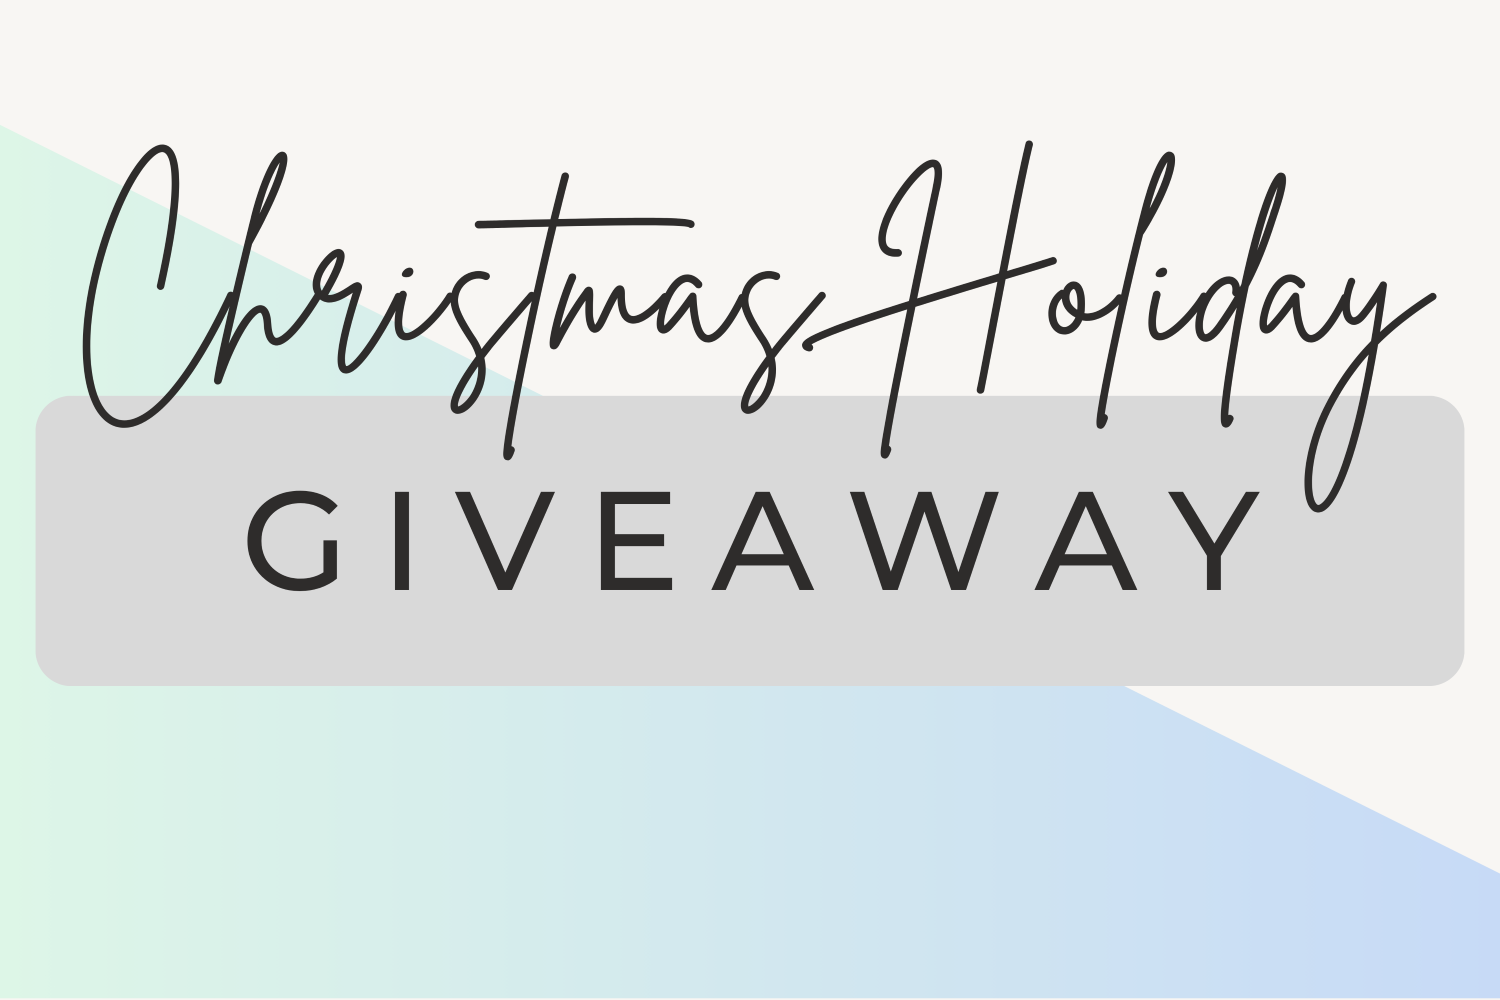 You are currently viewing The Great Bloggers Holiday Giveaway and Gift Guide